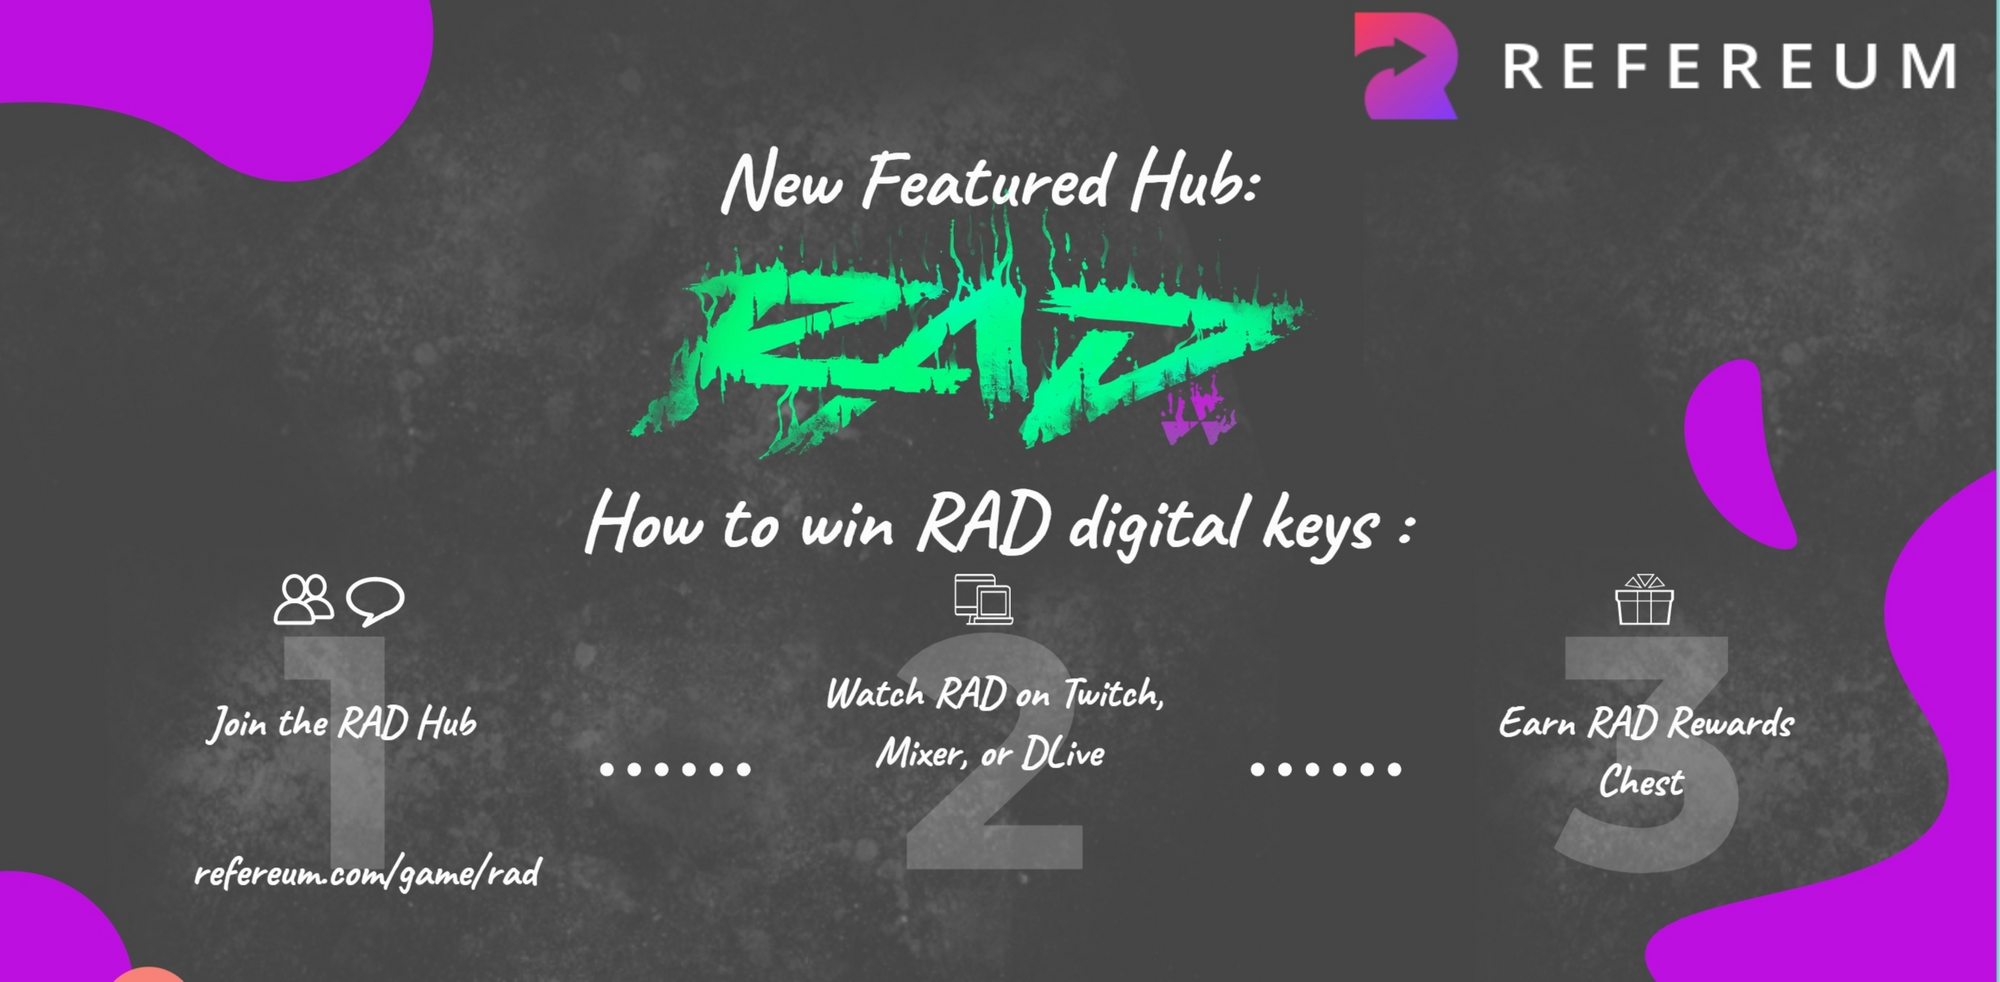 RAD is our latest featured game!